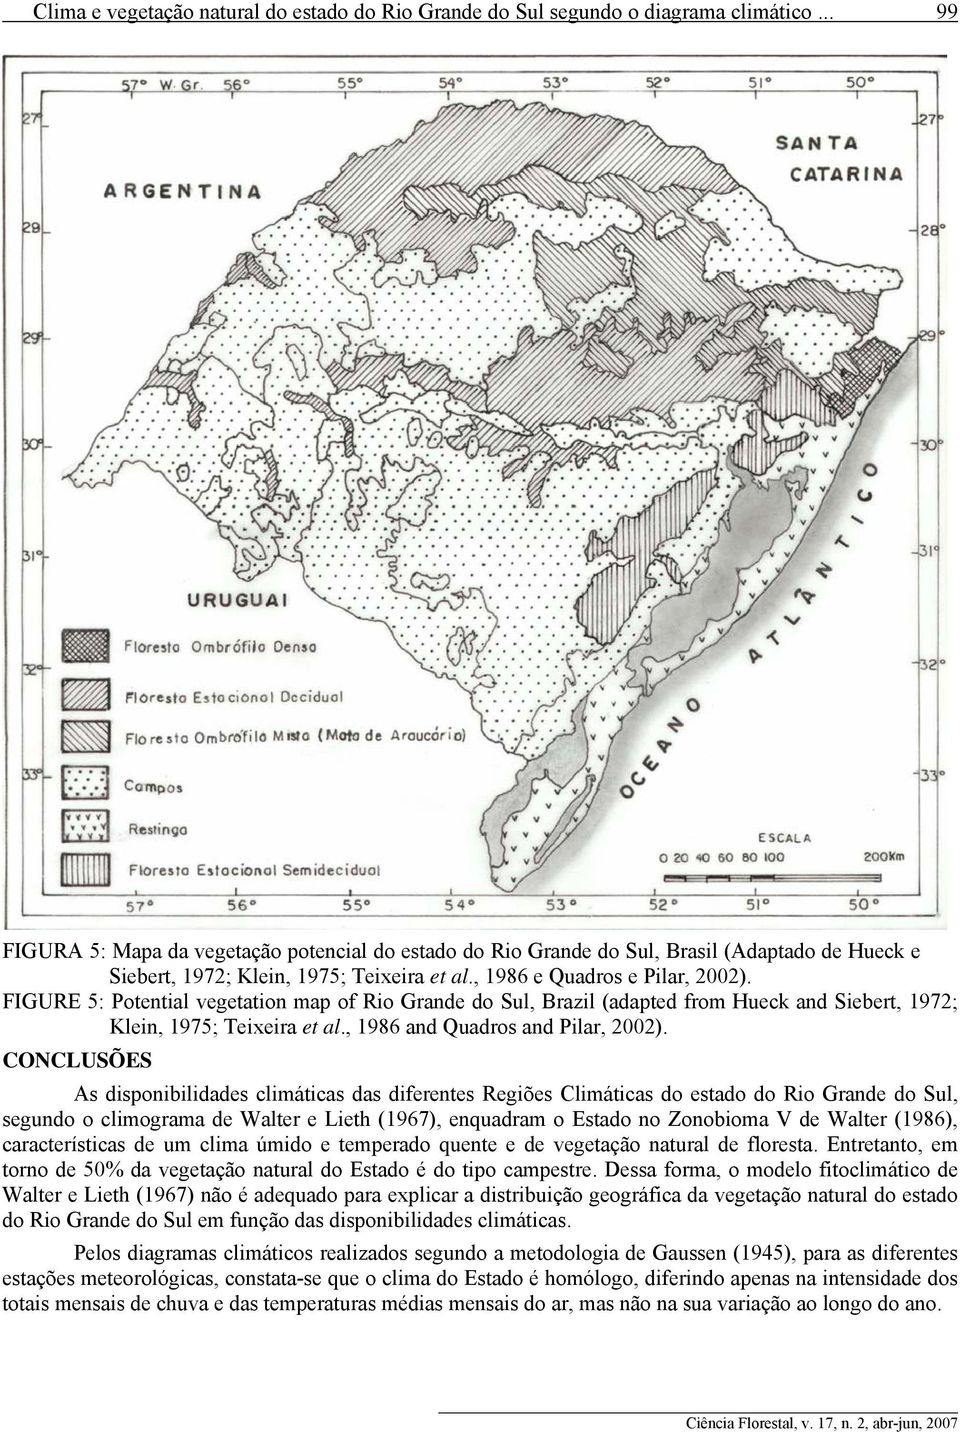 FIGURE 5: Potential vegetation map of Rio Grande do Sul, Brazil (adapted from Hueck and Siebert, 1972; Klein, 1975; Teixeira et al., 1986 and Quadros and Pilar, 2002).